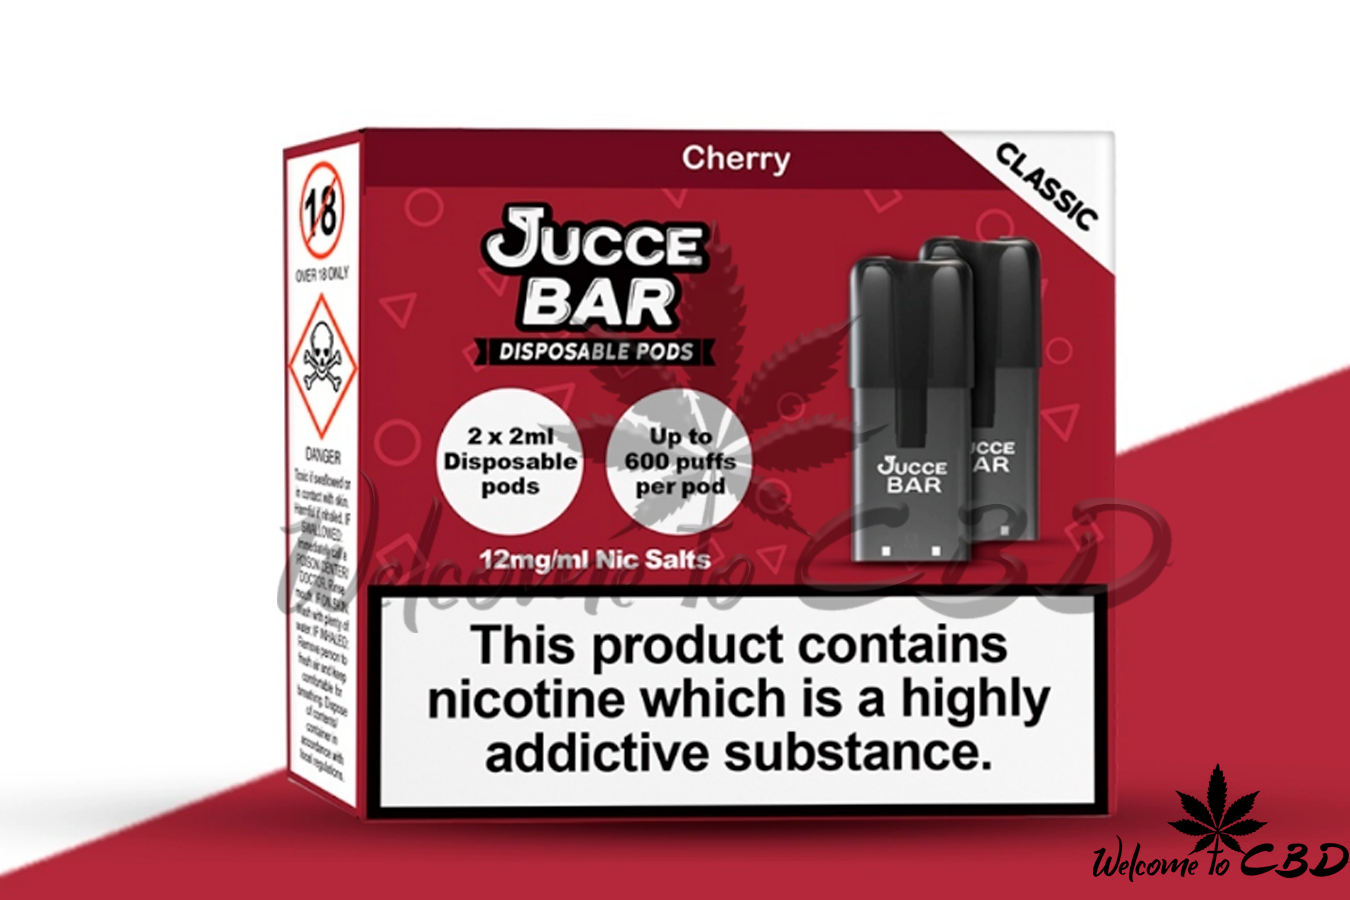 JUCCE BAR DISPOSABLE PODS CHERRY COLA